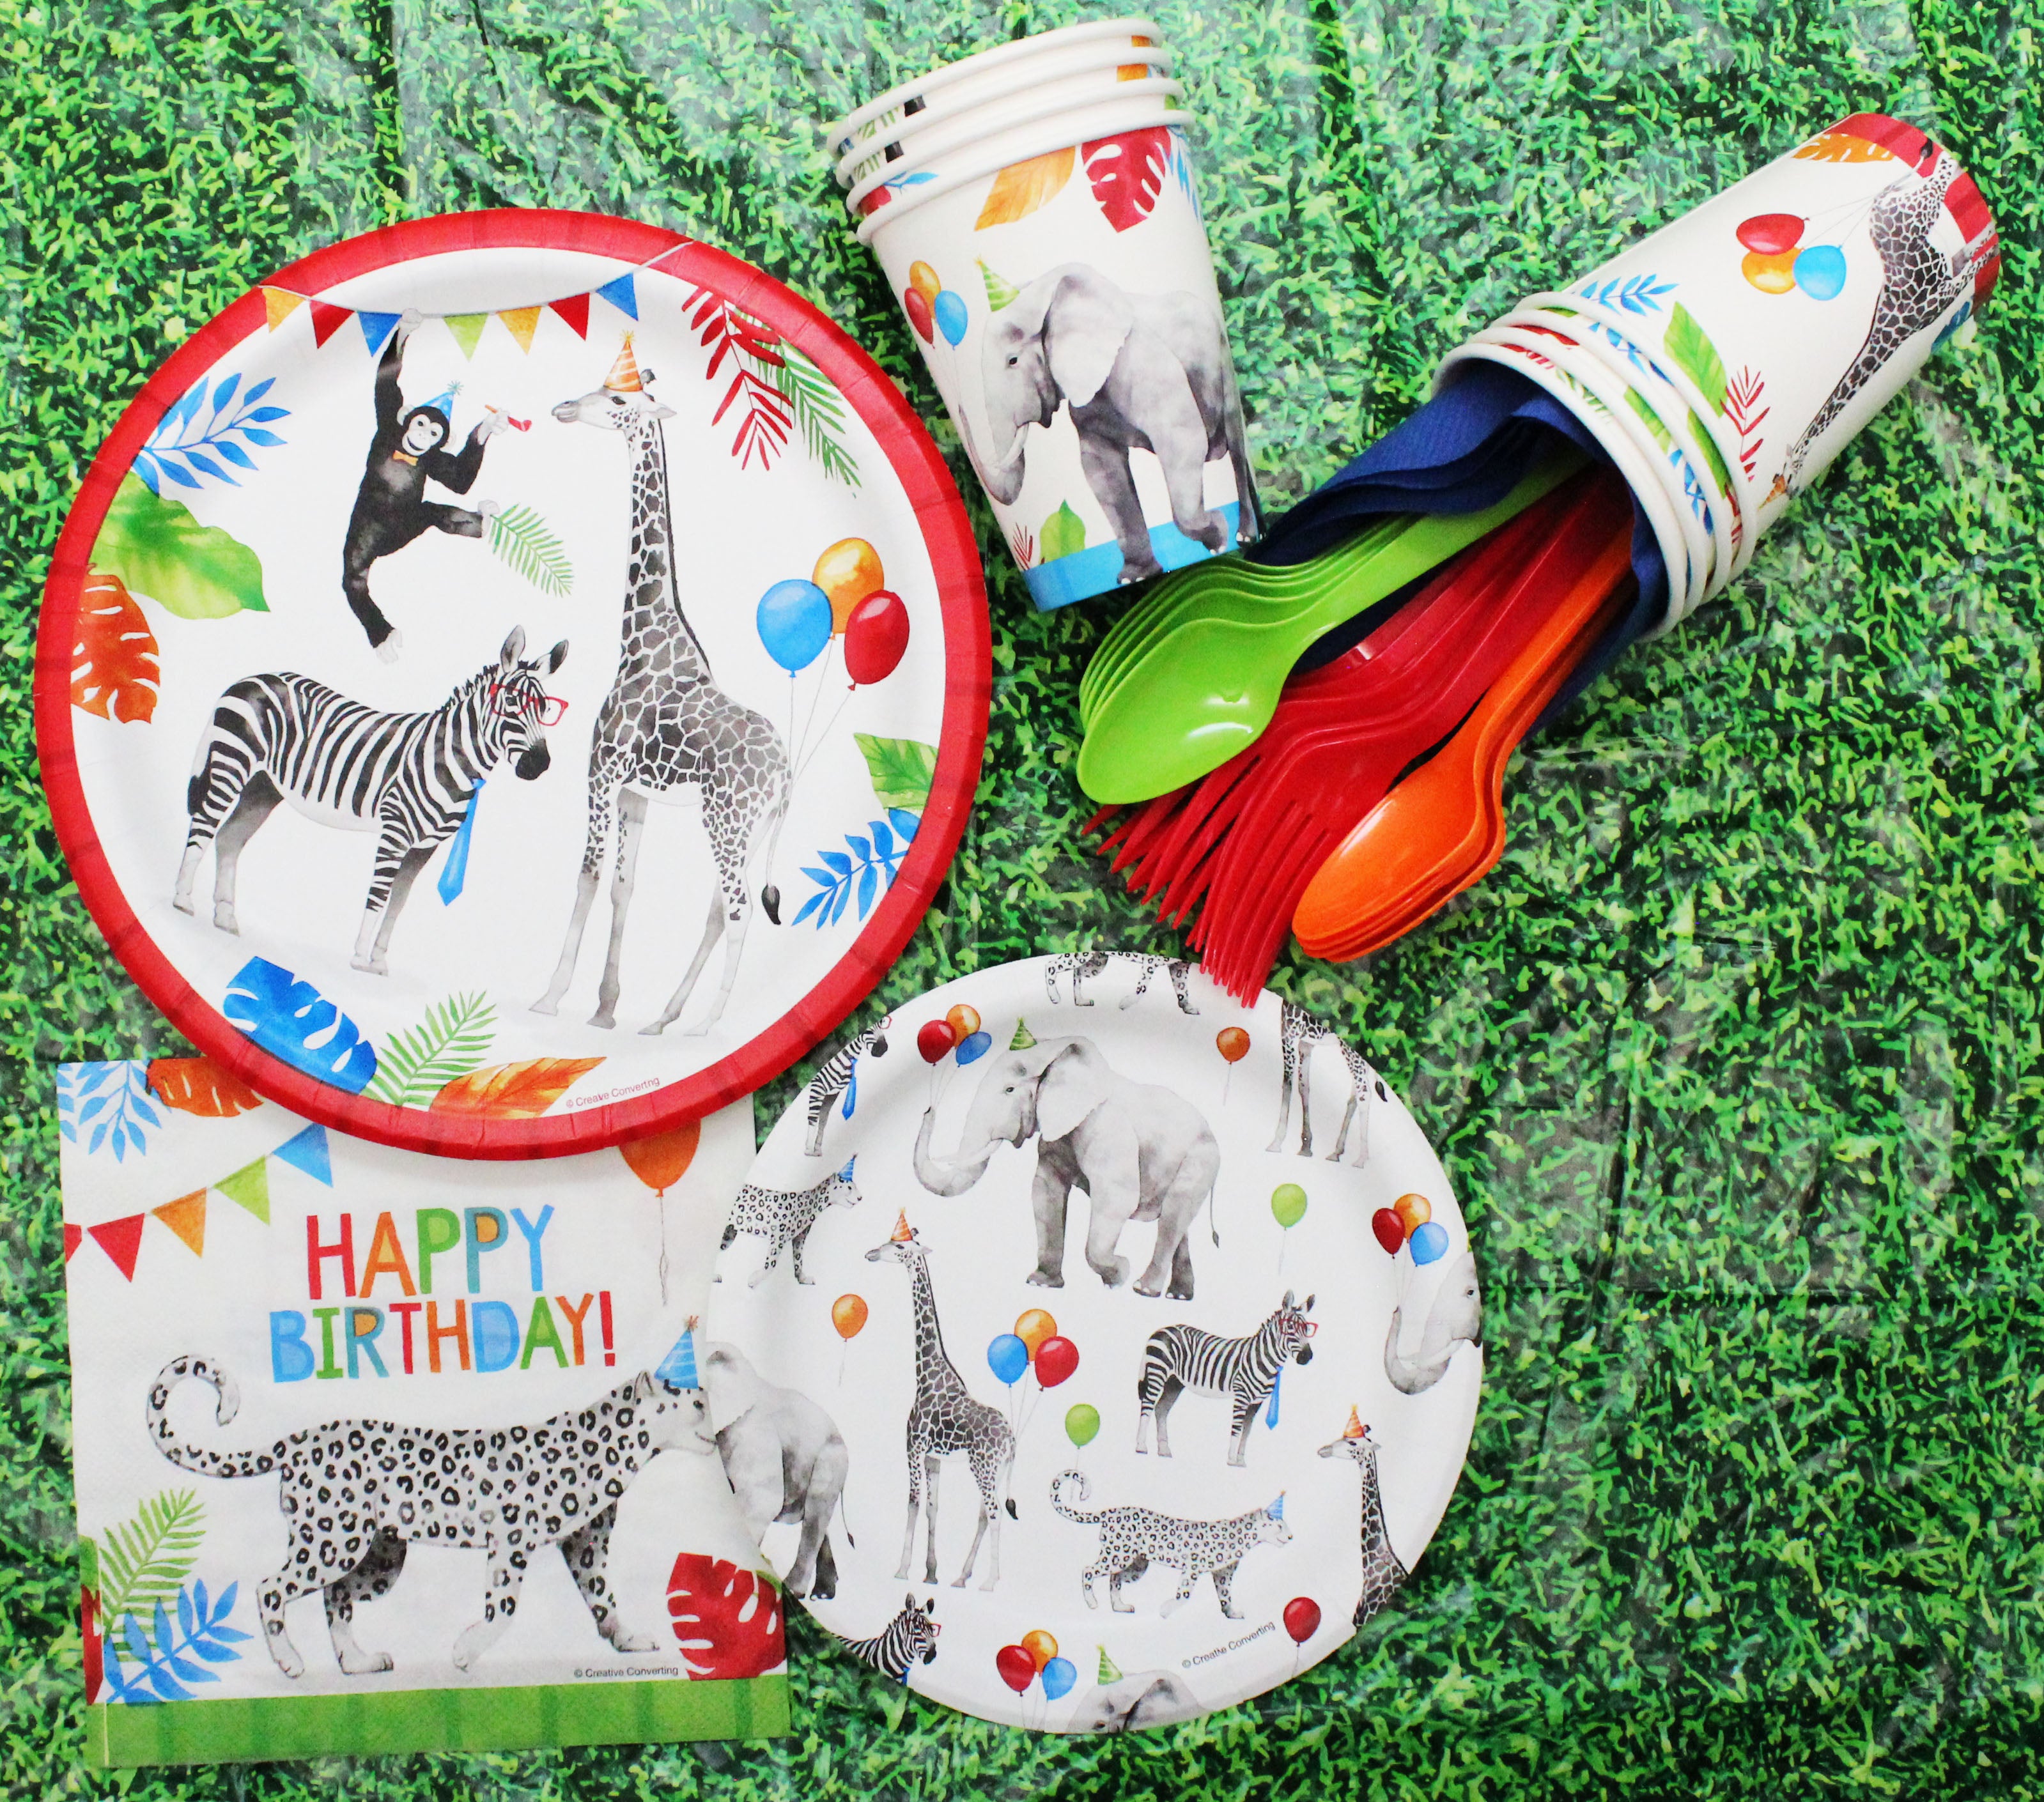 Party Animals Themed Supplies with grass tablecover